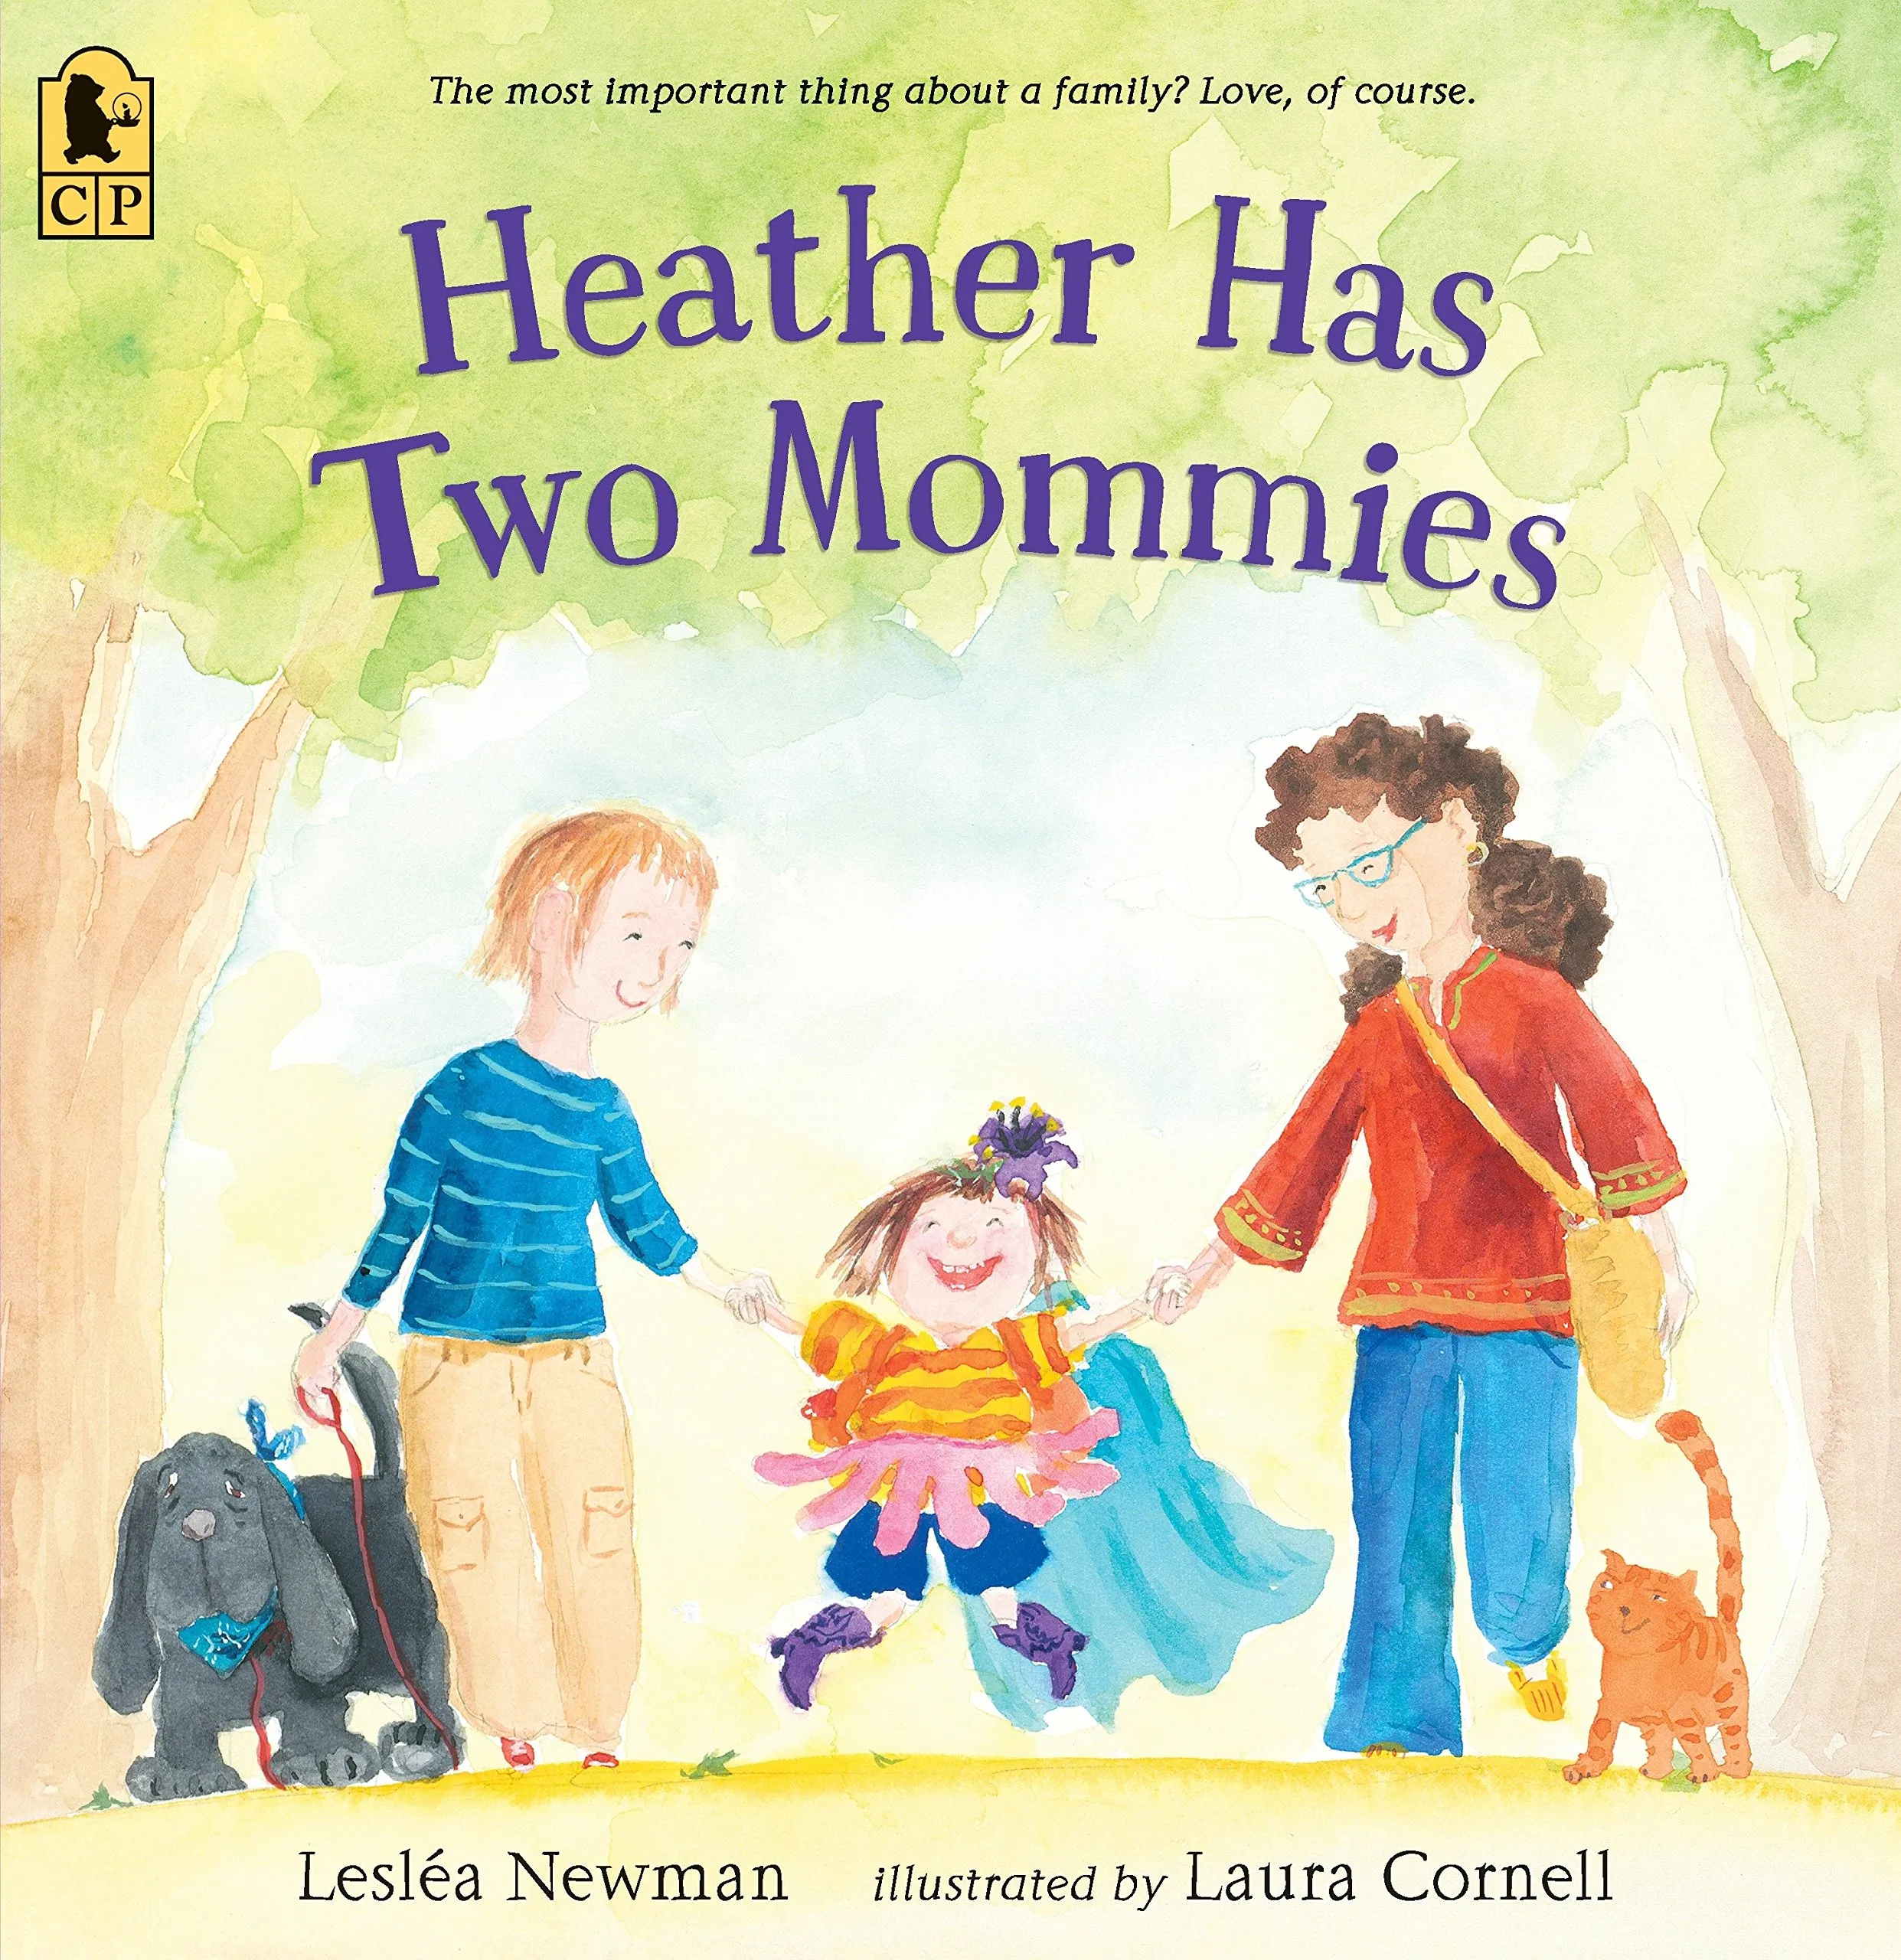 Heather-Has-Two-Mommies-cover-L-Newman-2015